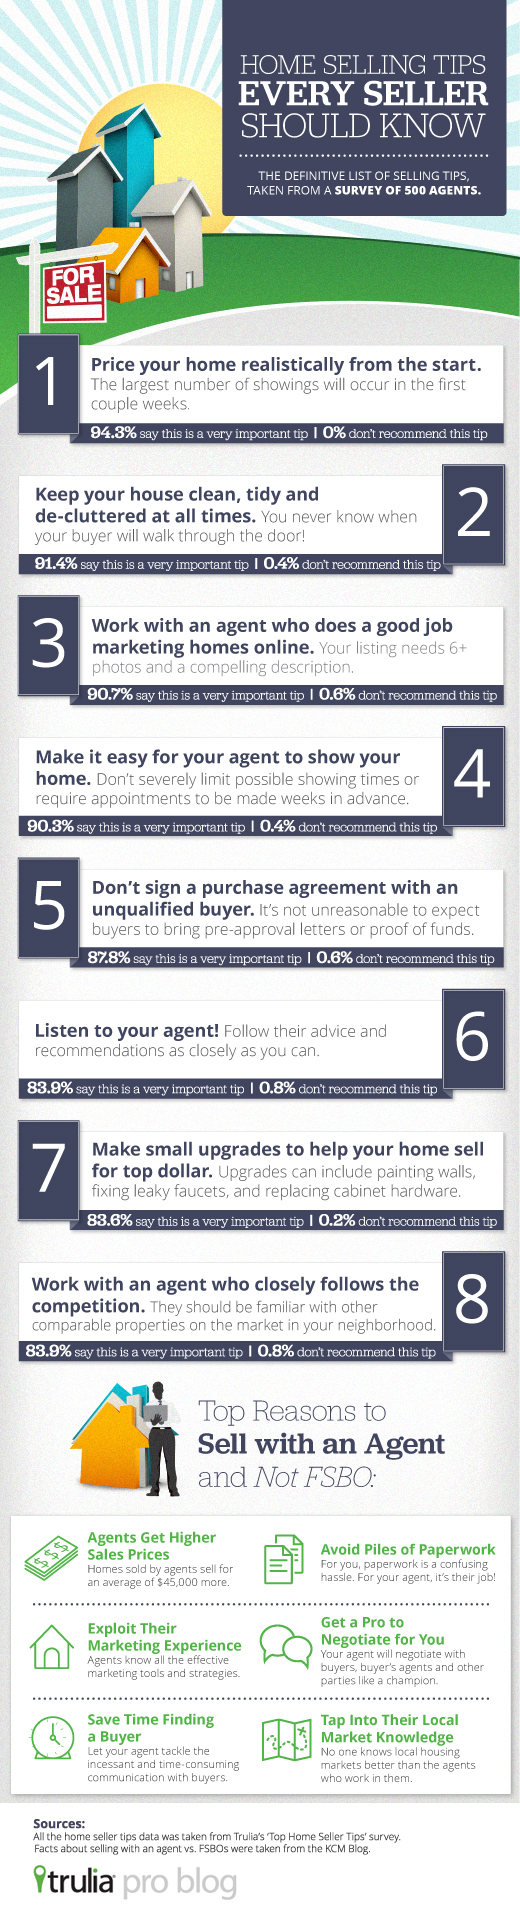 Home Selling Tips/selling property real estate real estate news 